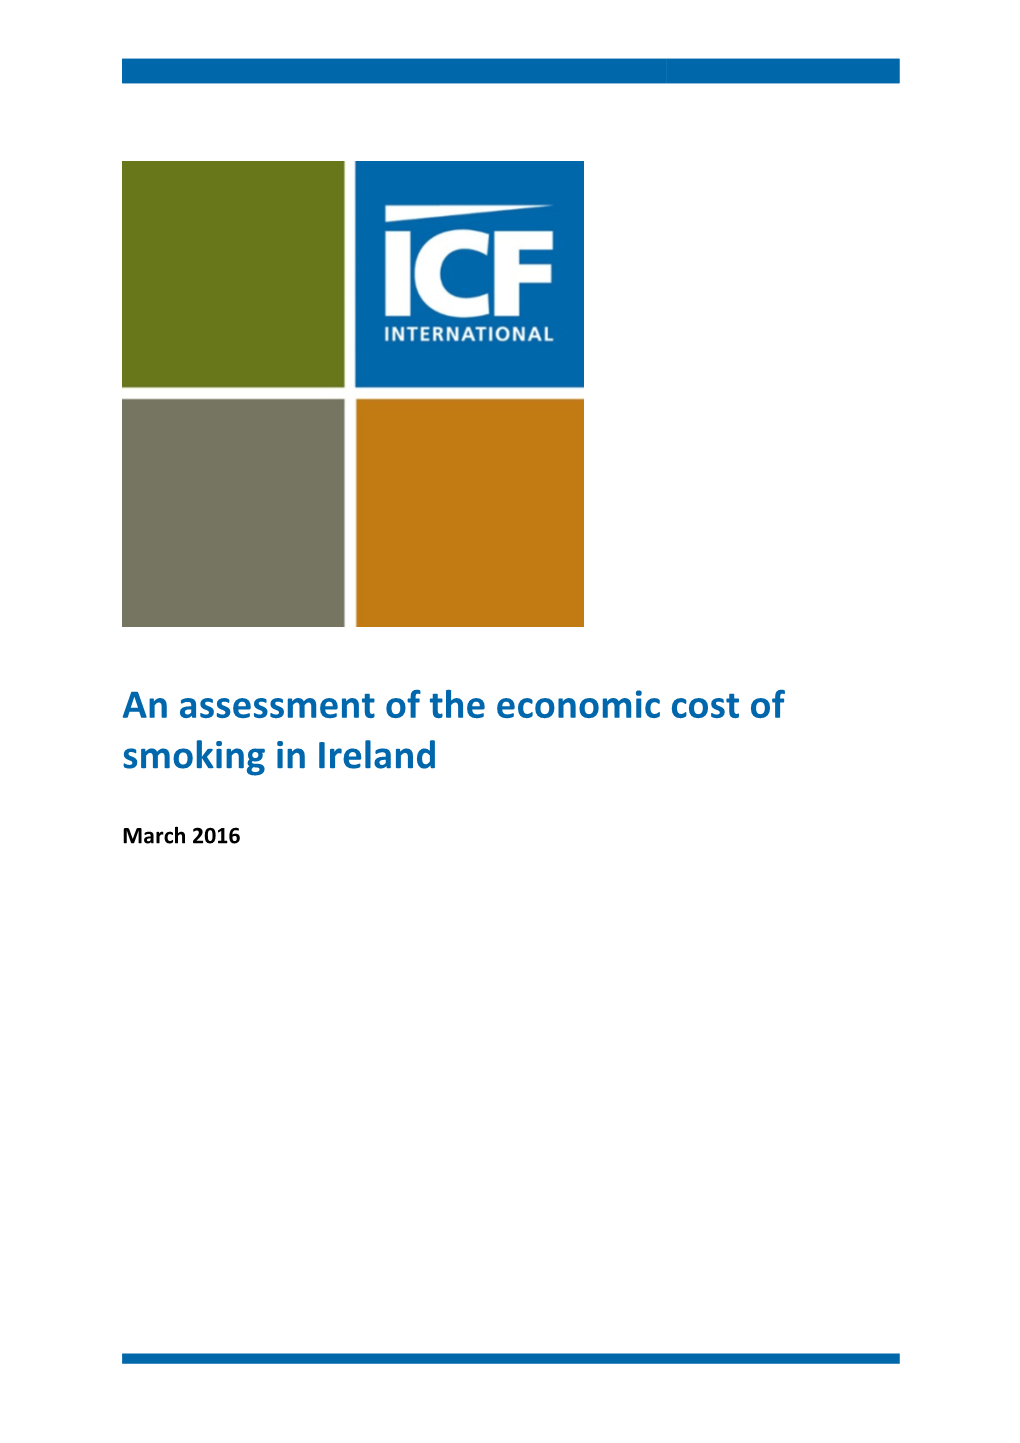 An Assessment of the Economic Cost of Smoking in Ireland